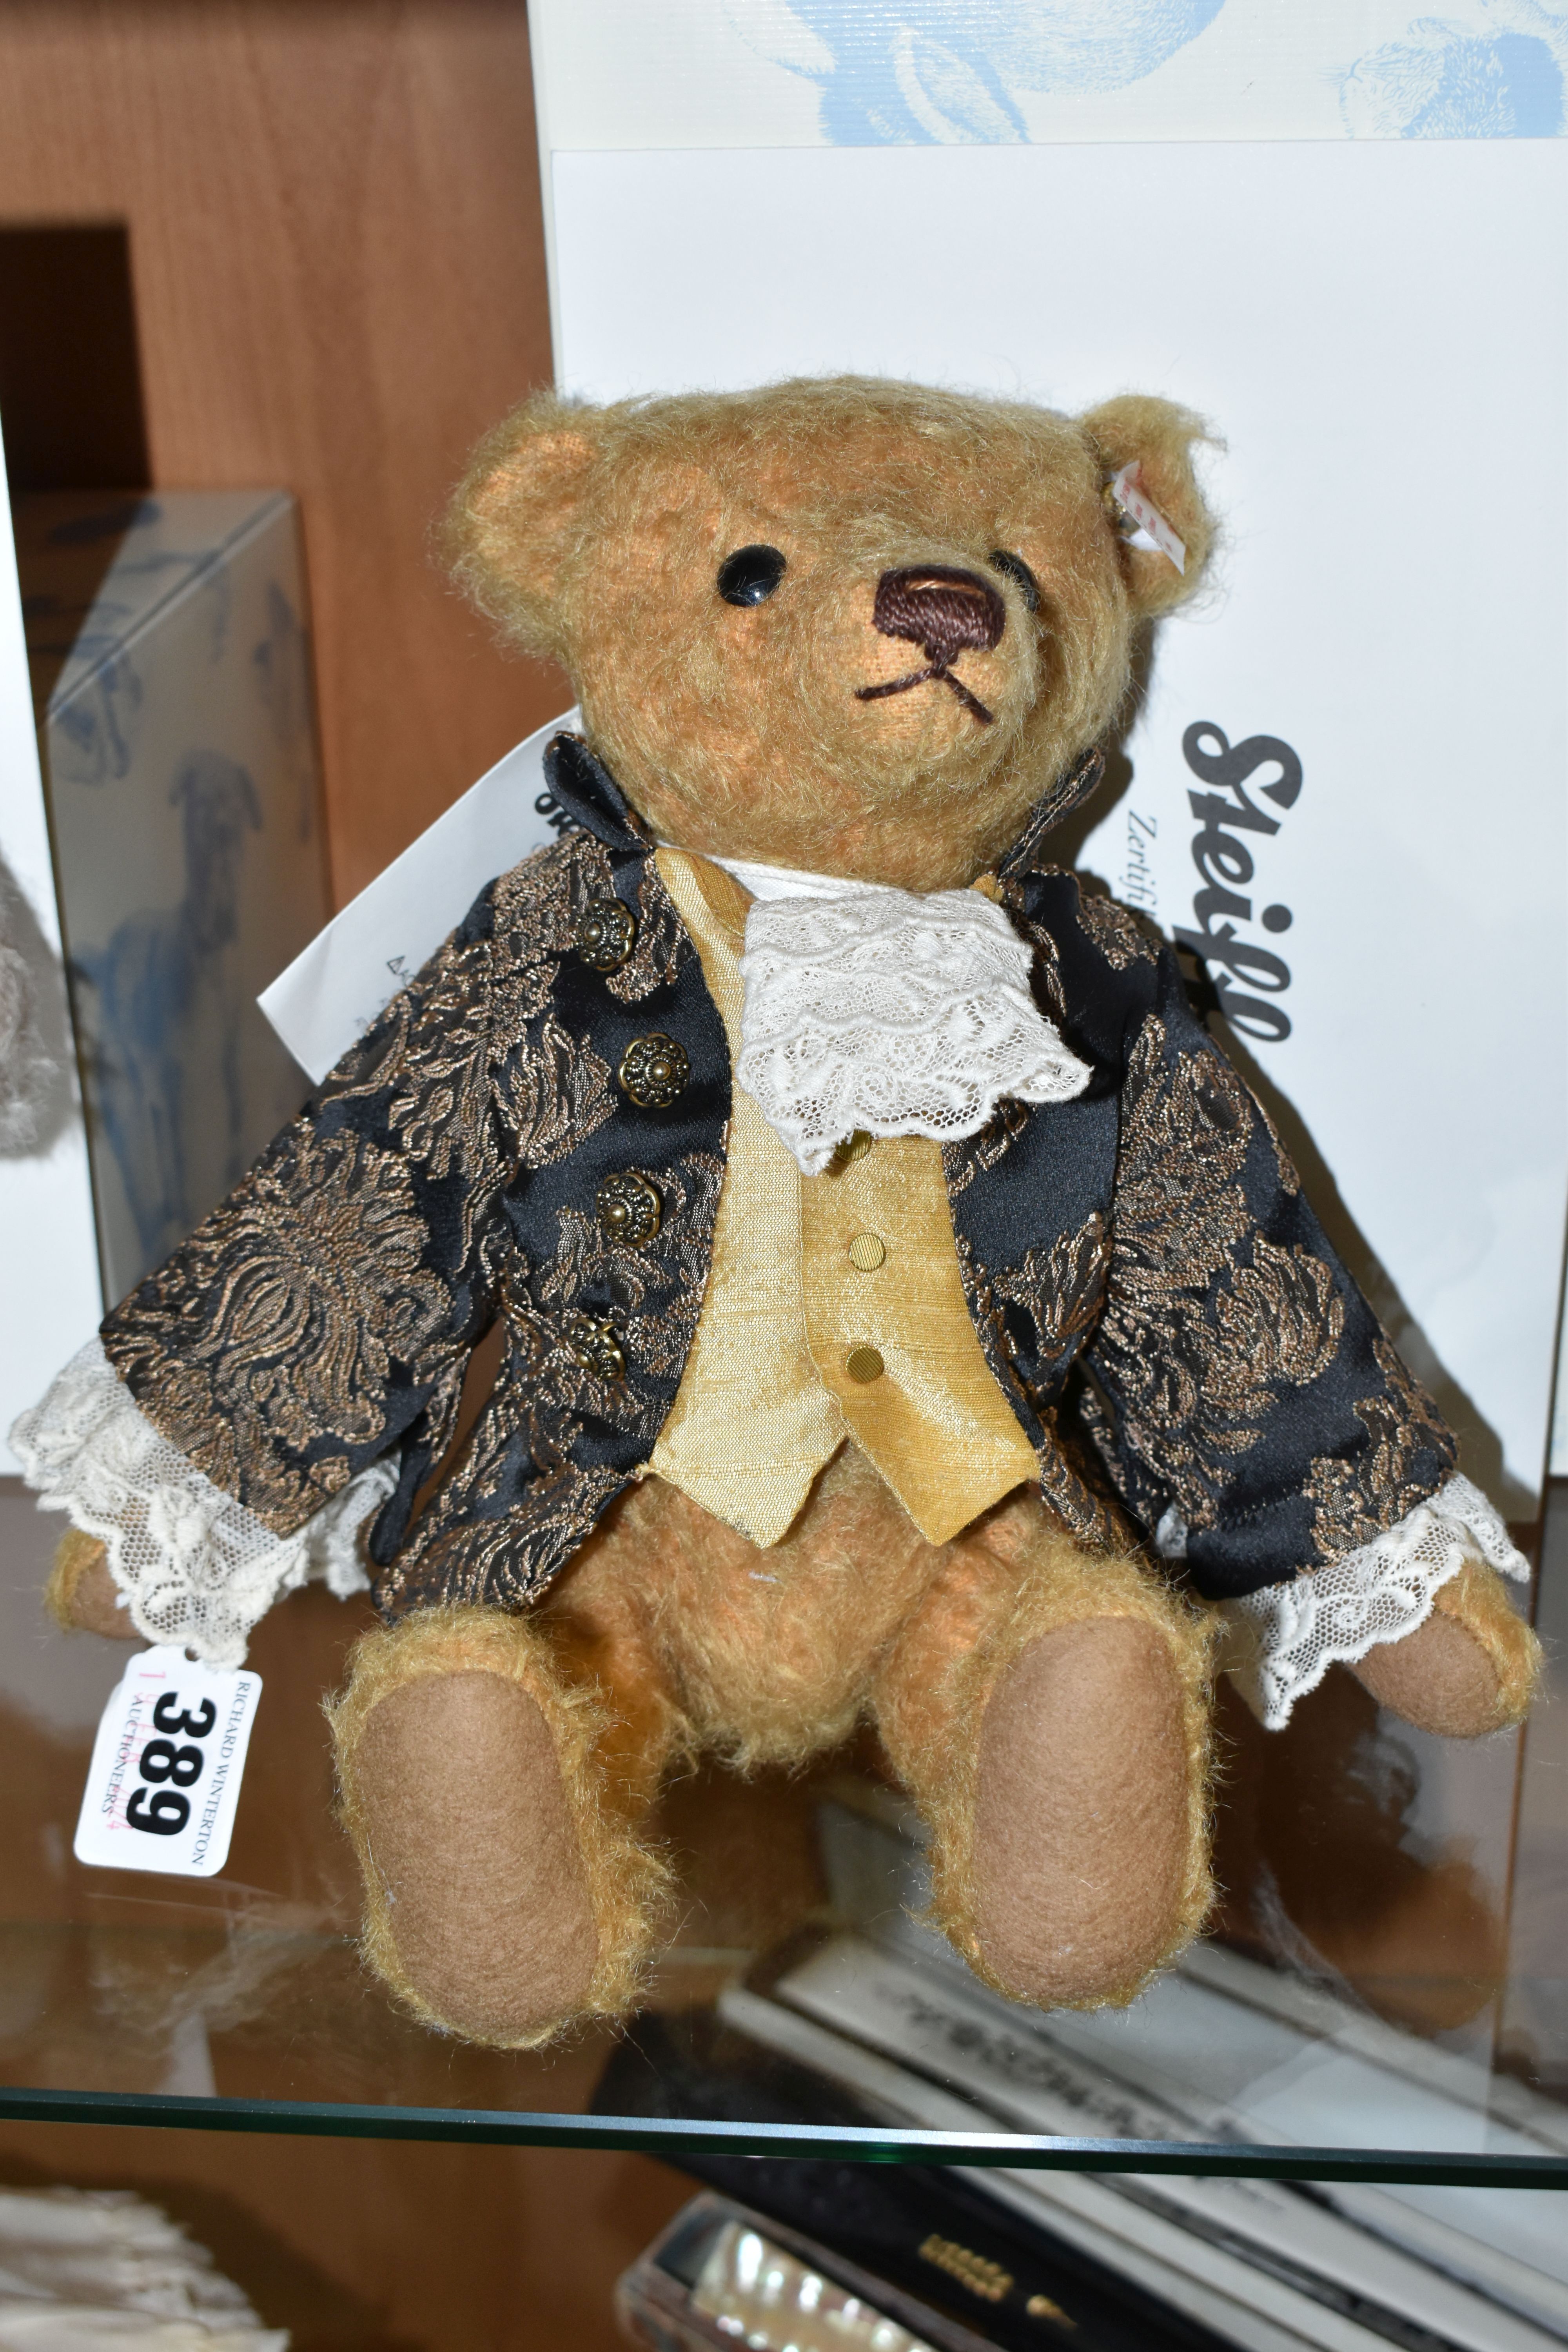 A BOXED LIMITED EDITION STEIFF SIR EDWARD TEDDY BEAR, with old gold mohair and cotton 'fur', gold